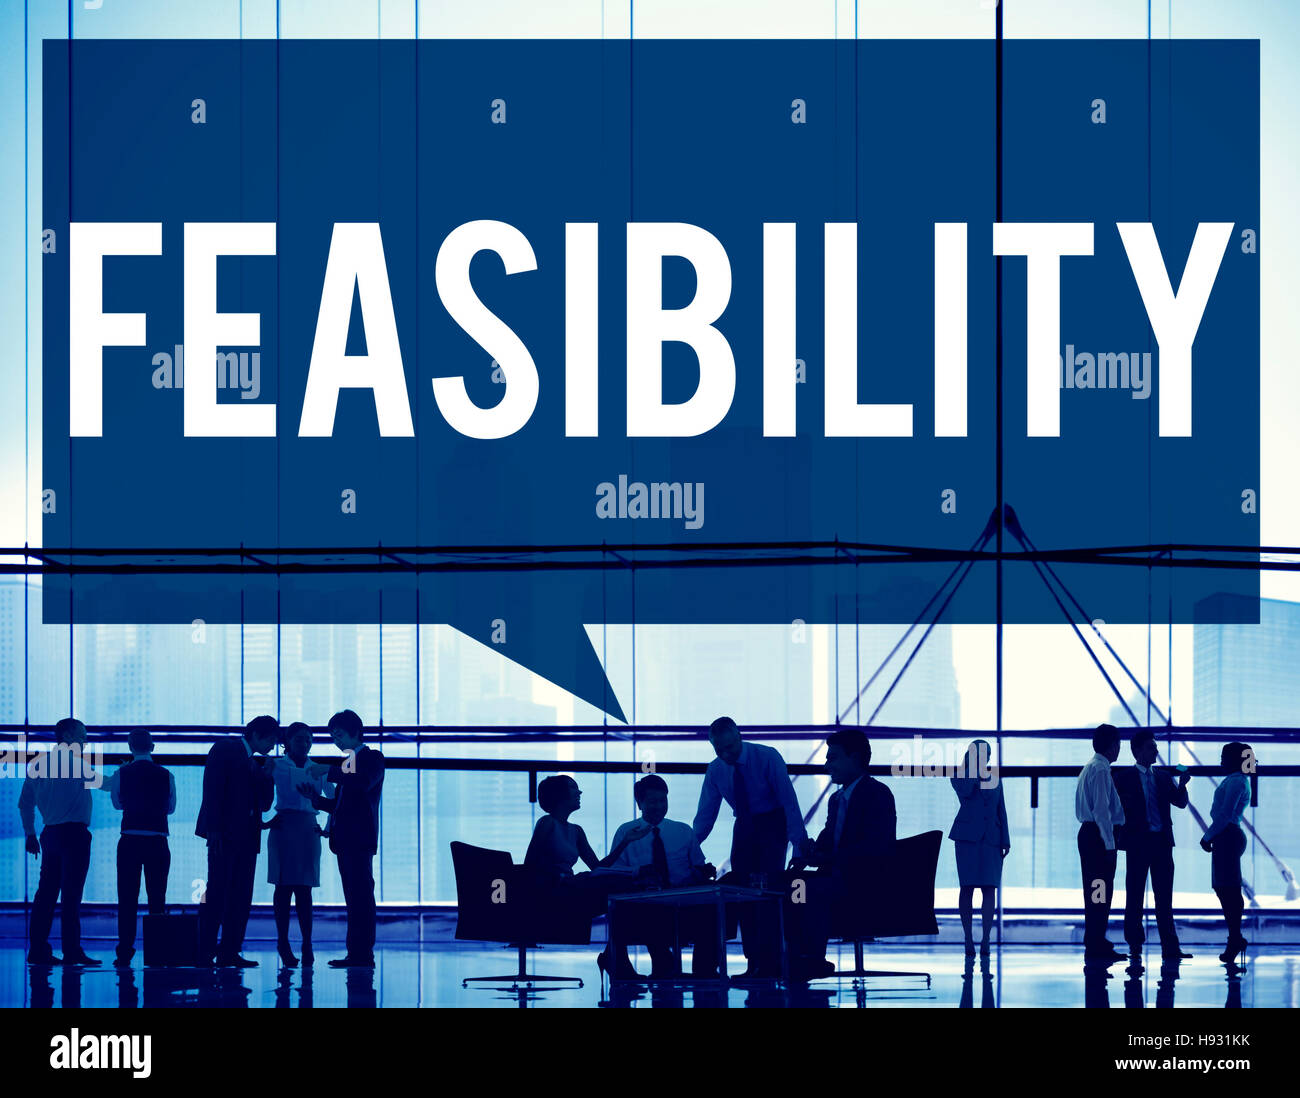 Feasibility Possibility Possible Potential Ideas Concept Stock Photo